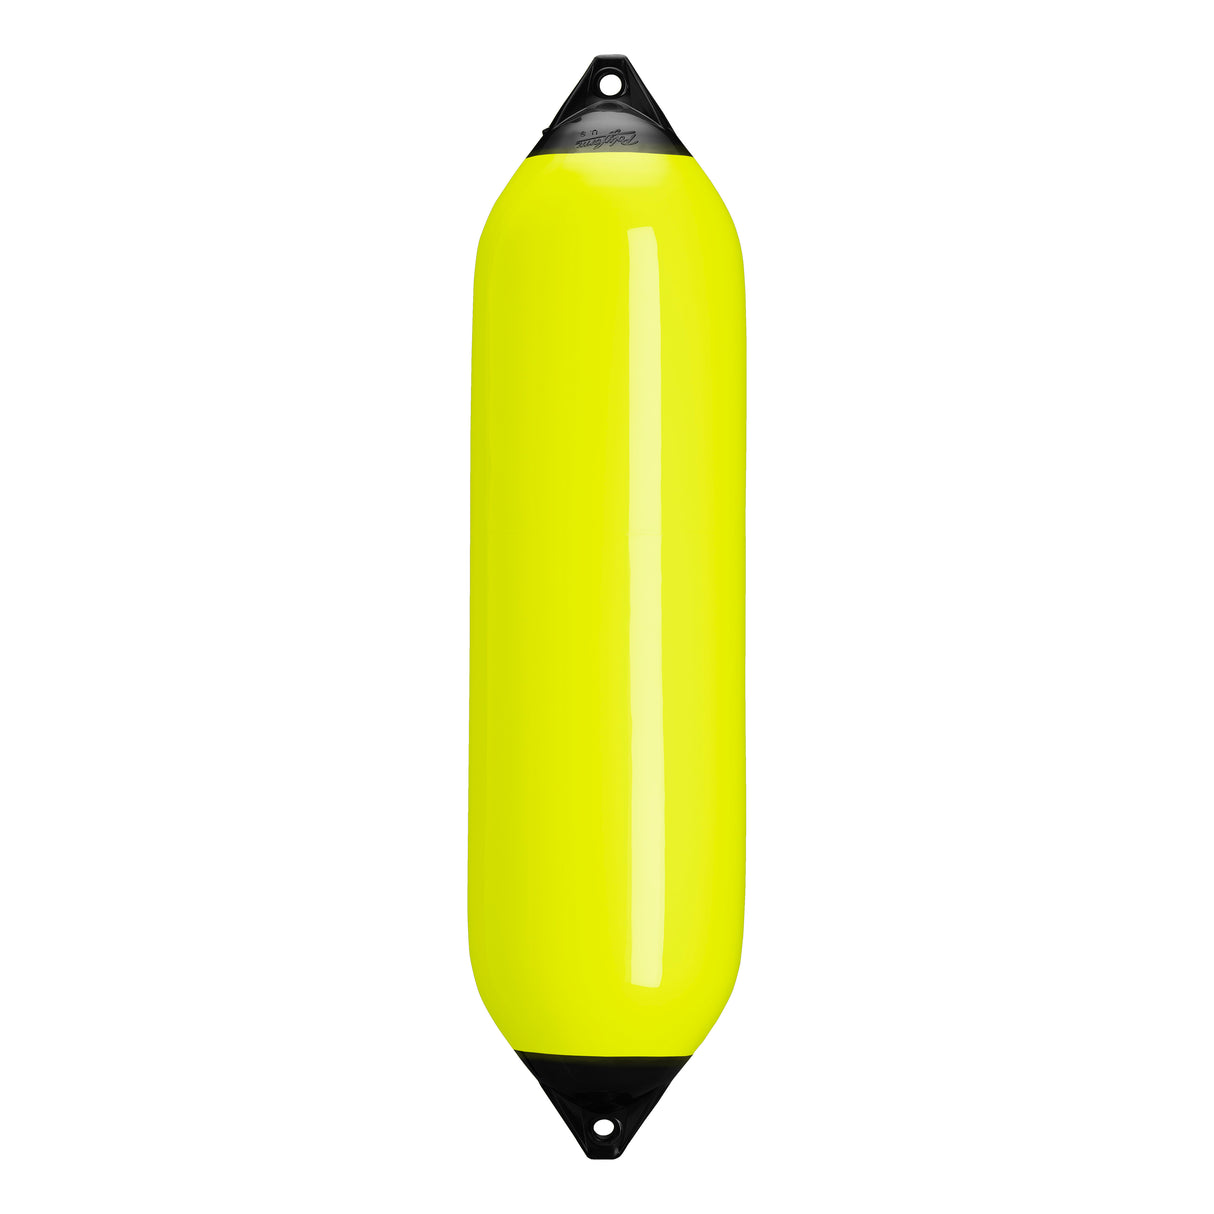 Saturn Yellow boat fender with Navy-Top, Polyform F-8